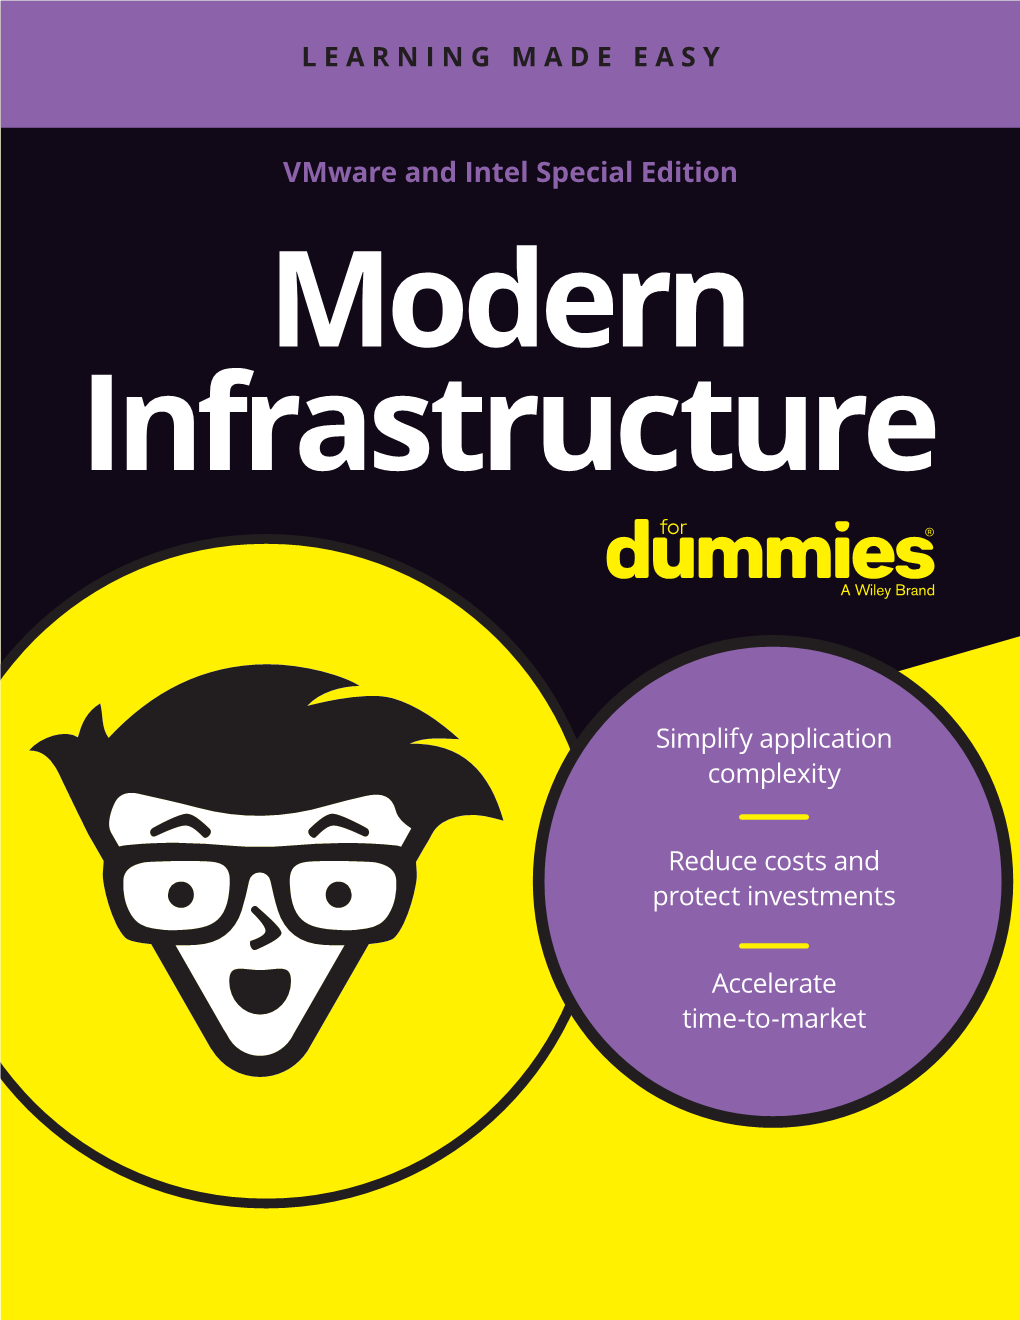 Vmware and Intel Special Edition Modern Infrastructure